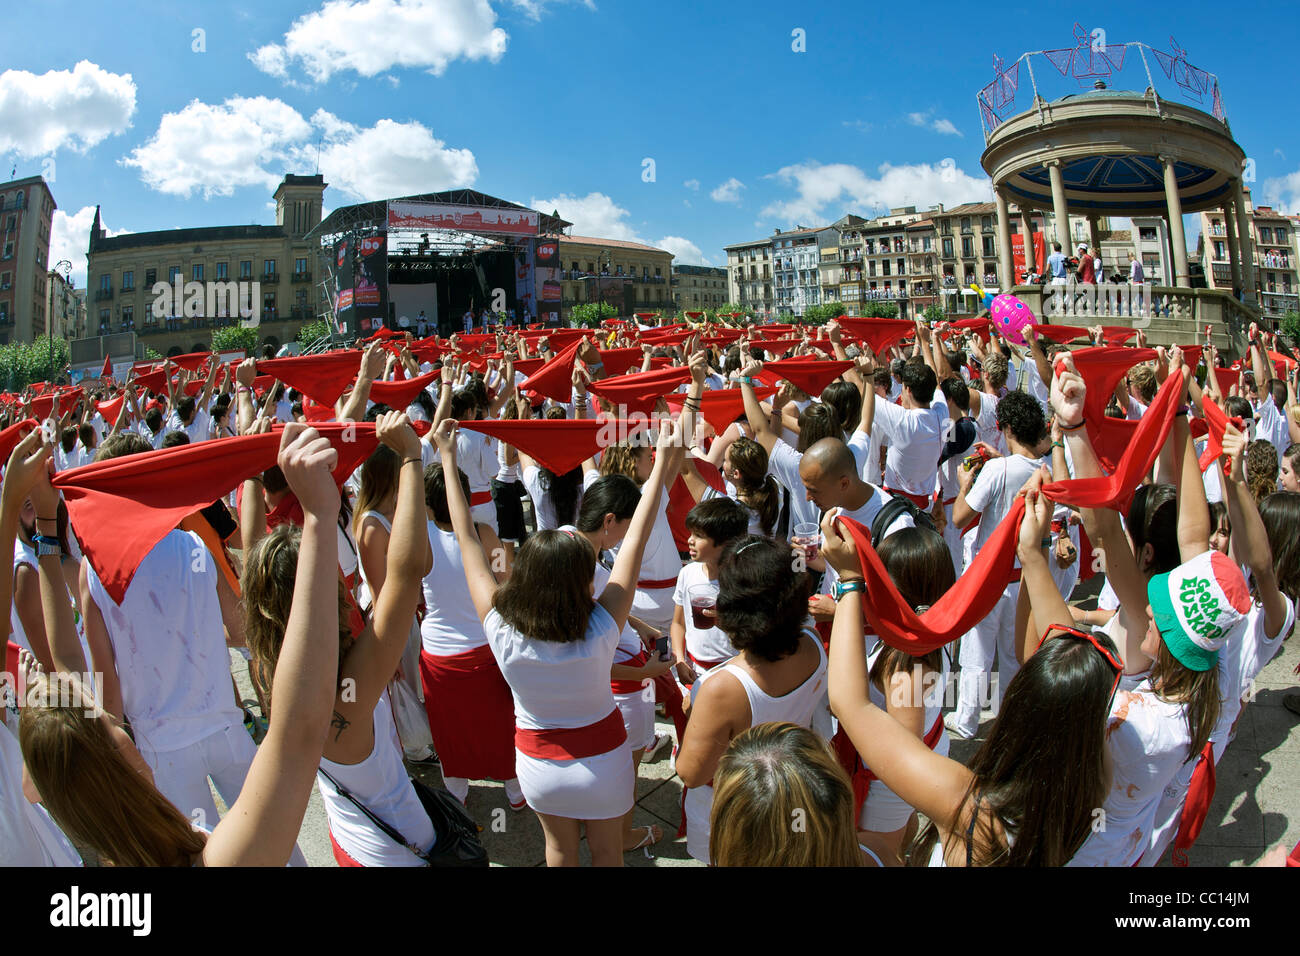 Jubilant crowds at the opening ceremony of the annual festival of San Fermin (aka the running of the bulls) in Pamplona, Spain. Stock Photo